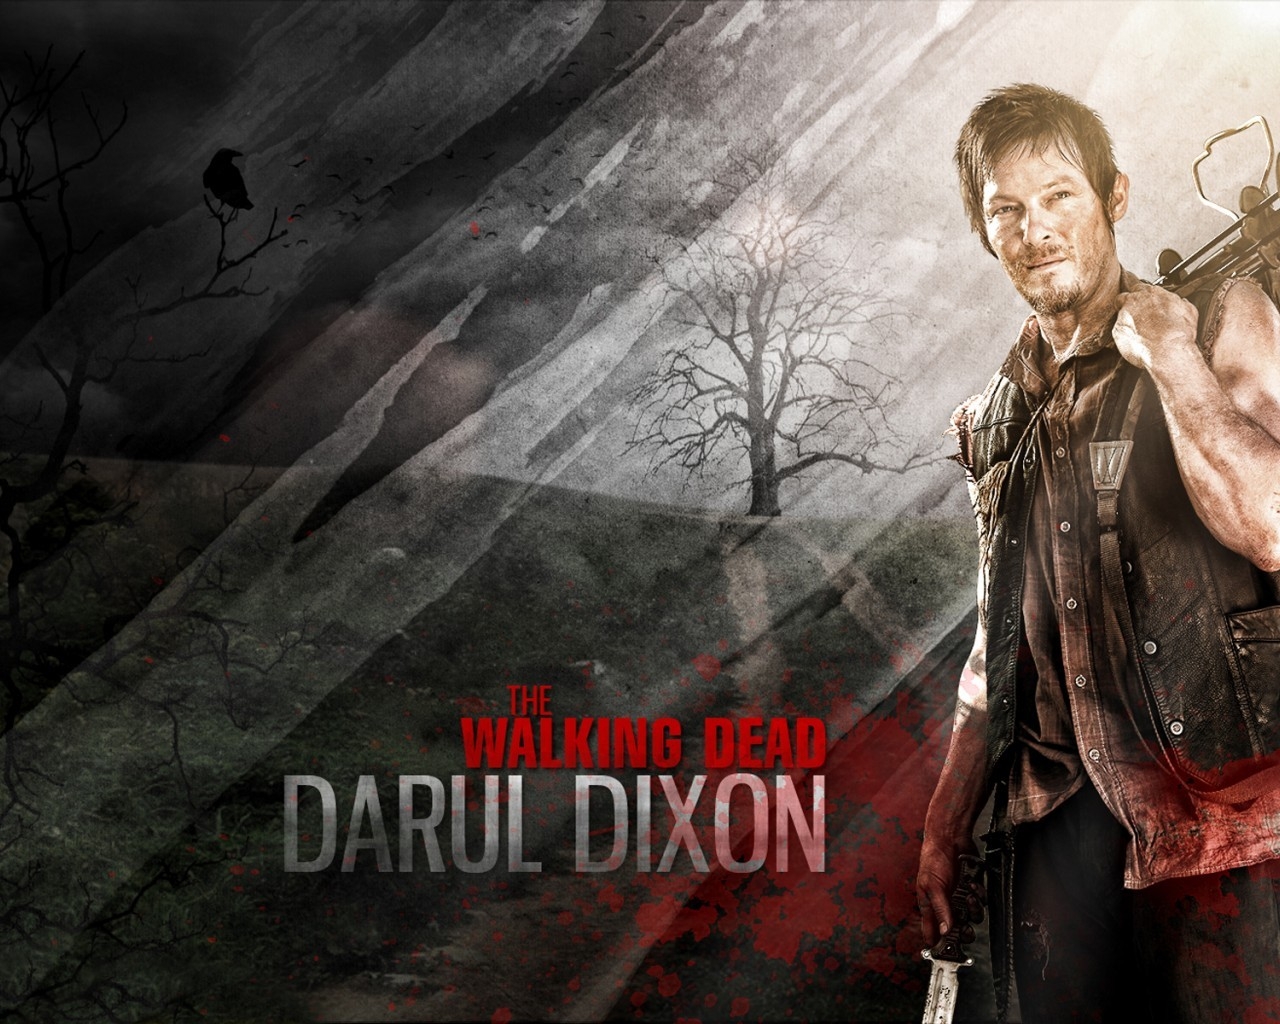 The Walking Dead Daryl Dixon for 1280 x 1024 resolution